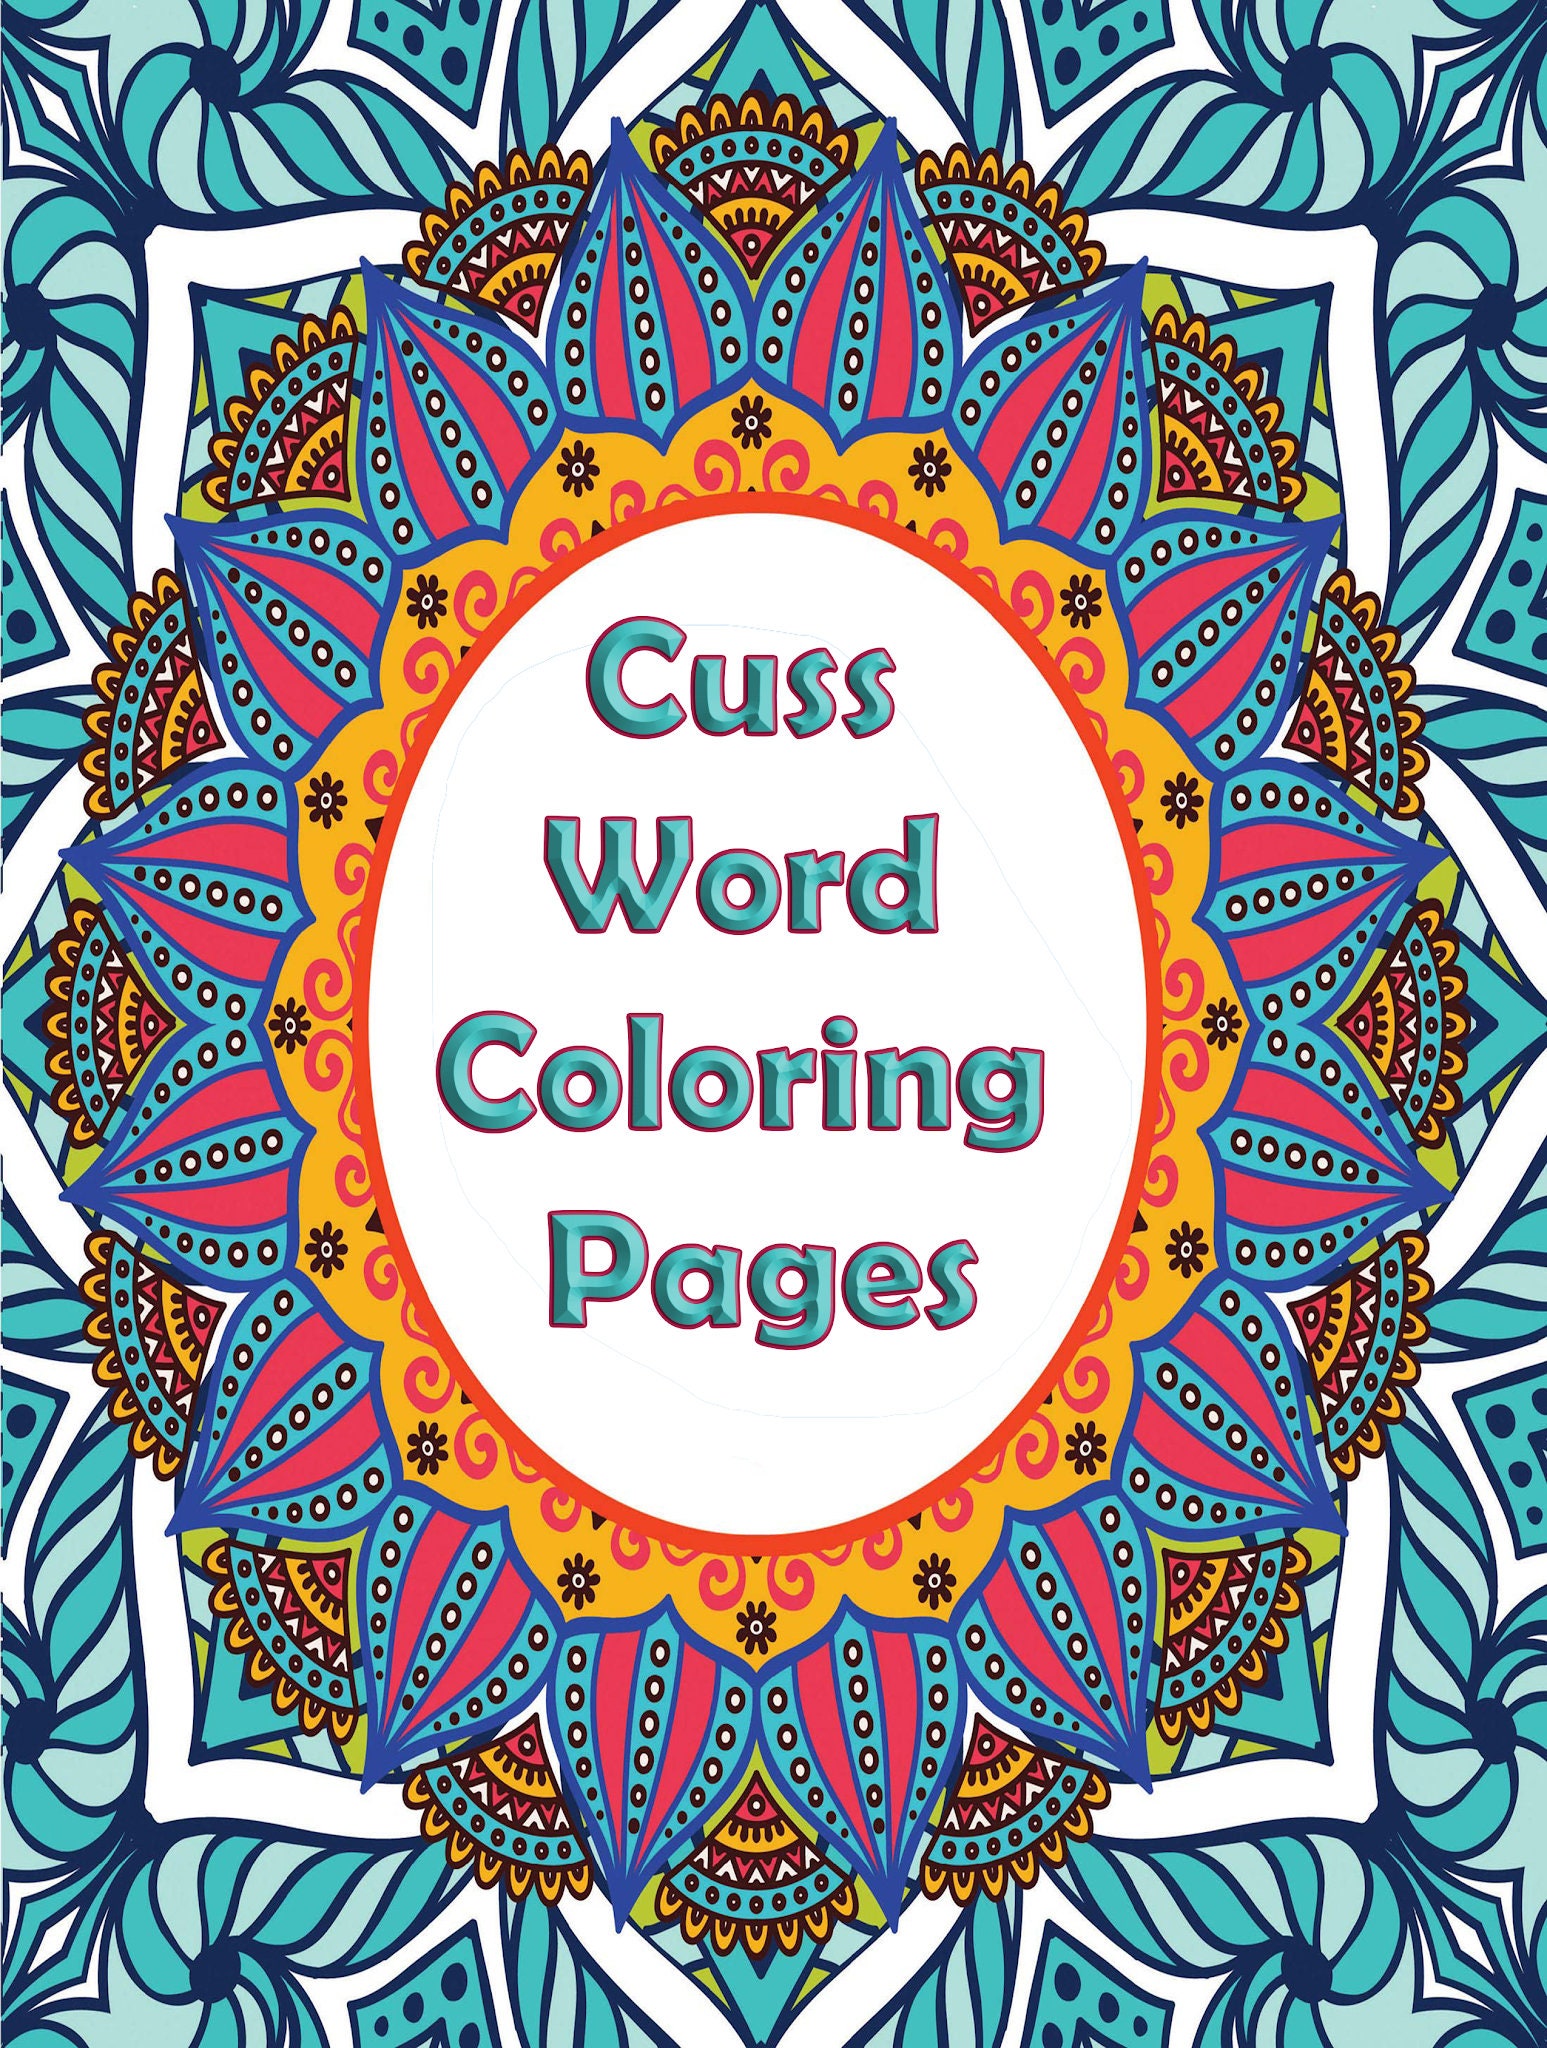 Download Cuss Word Coloring Pages Best Swear Word Coloring Book Word Etsy